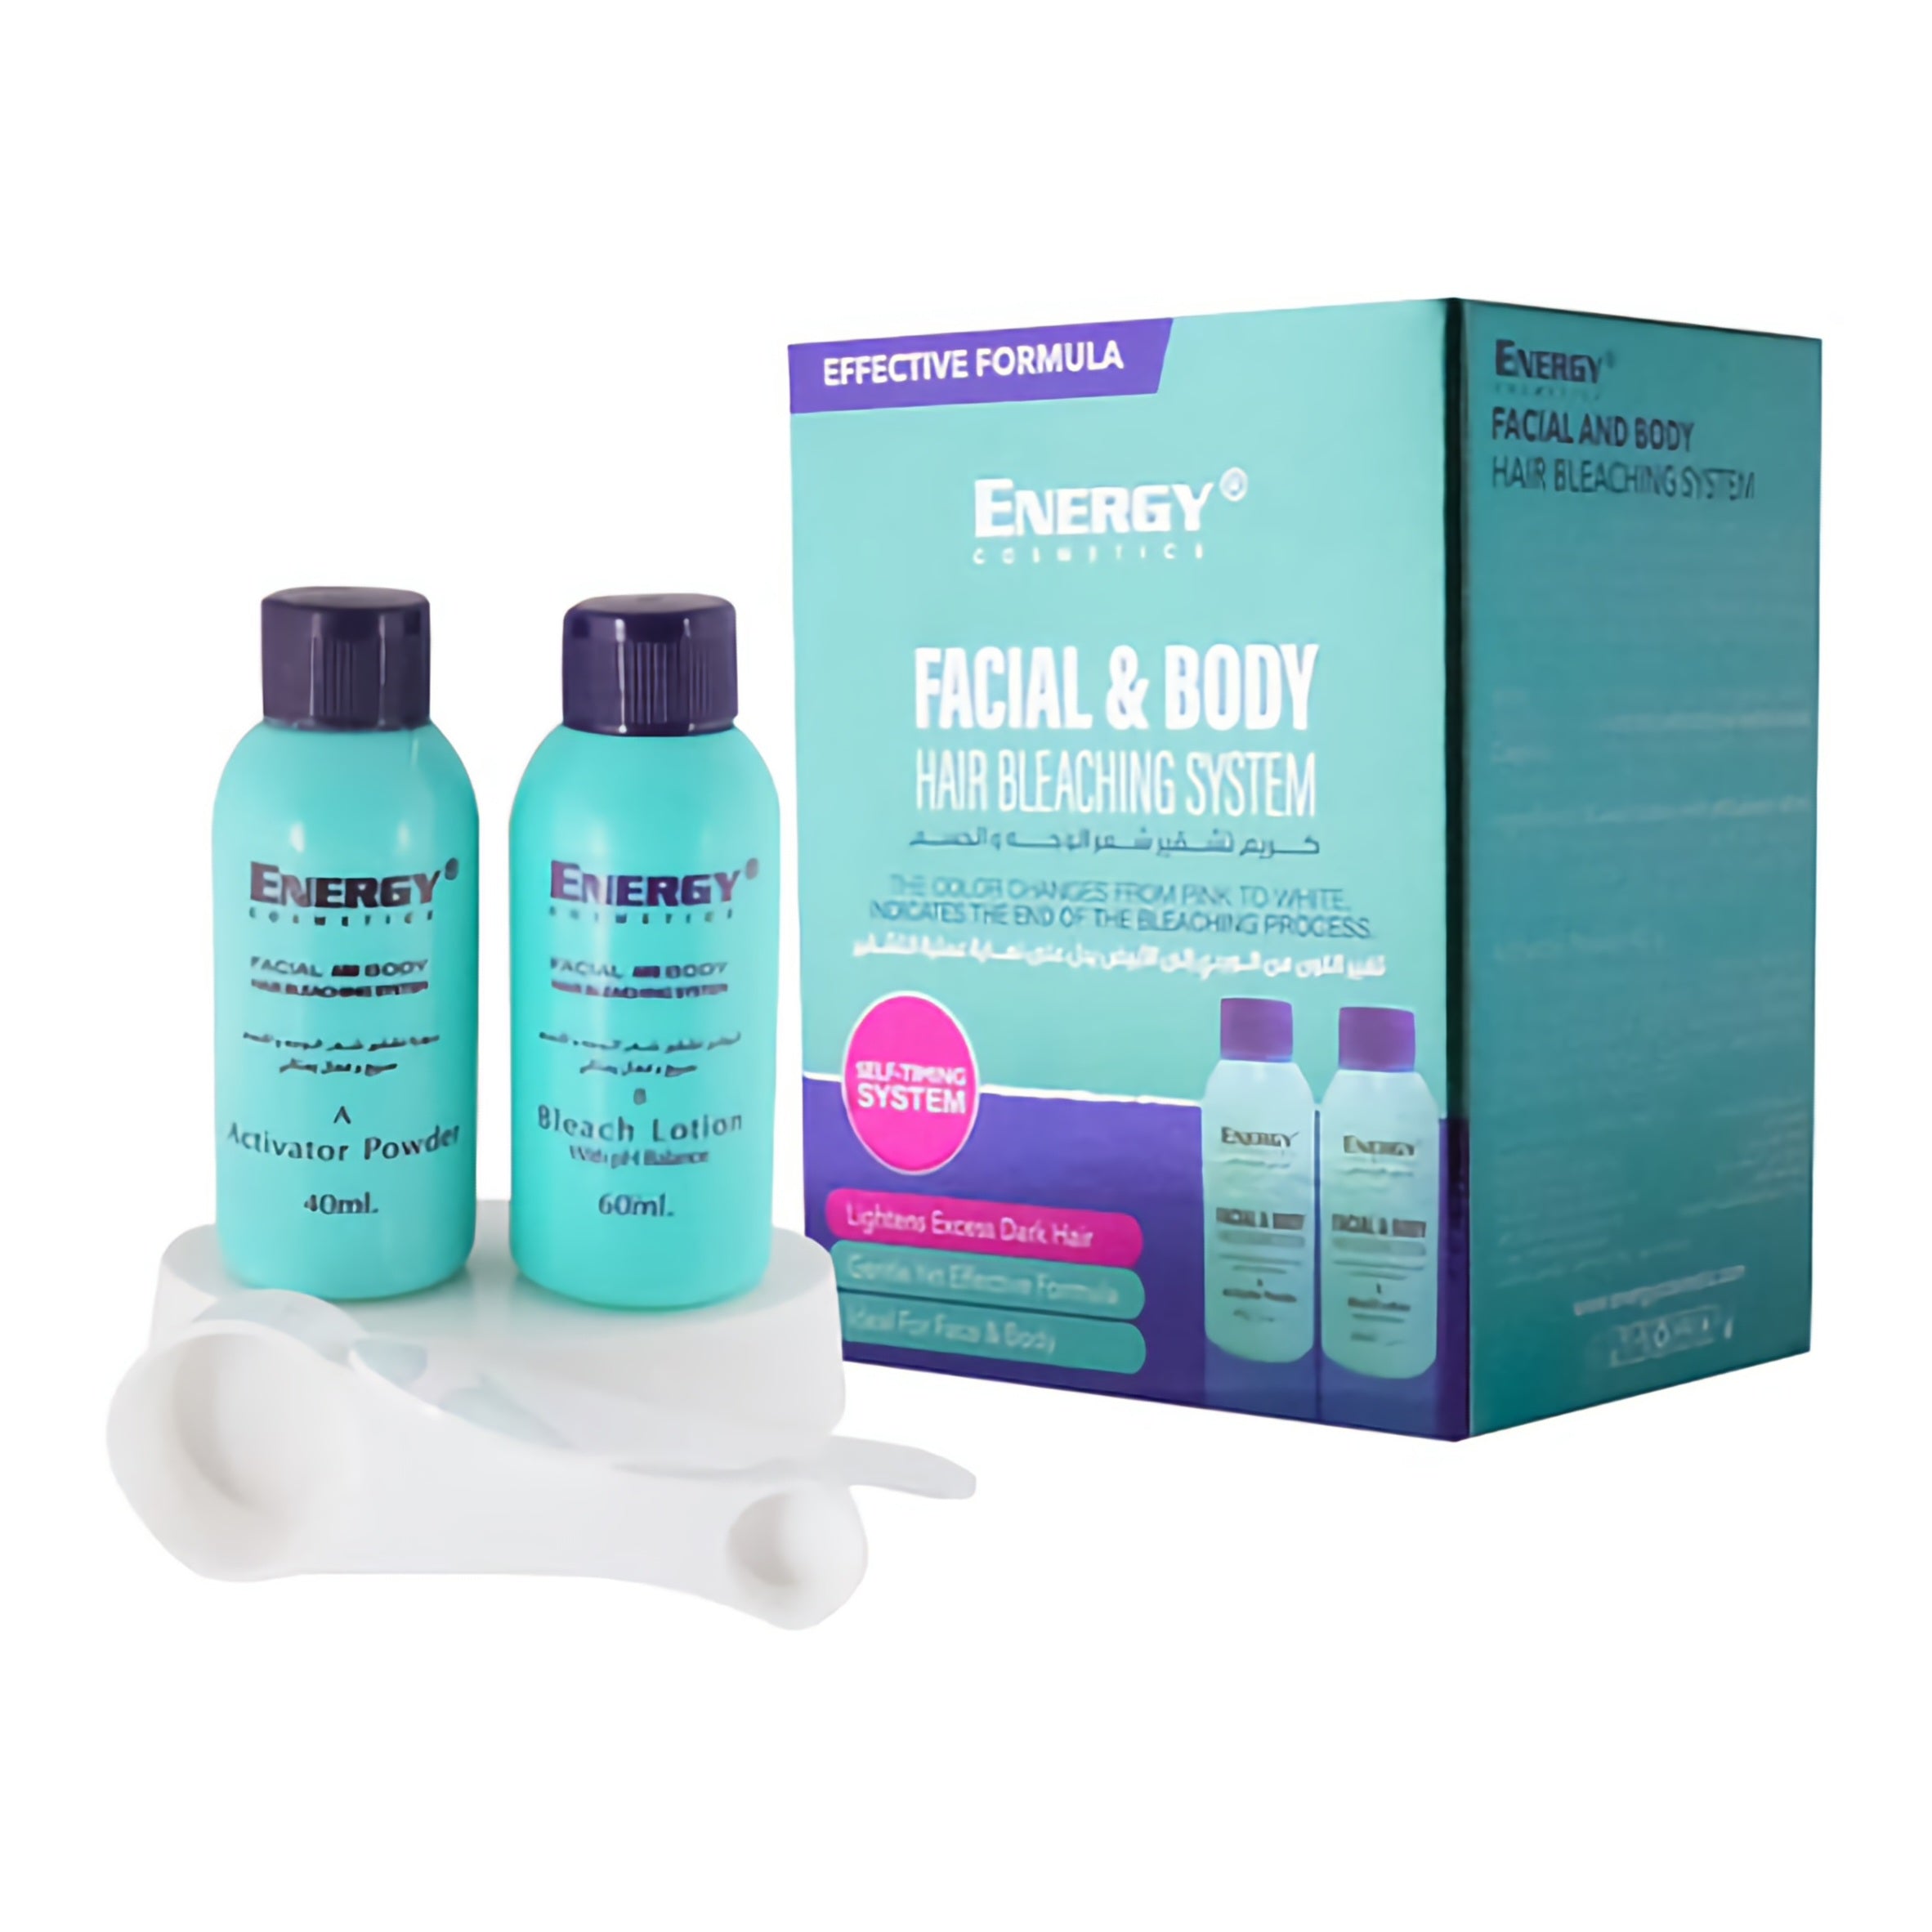 Facial And Body Hair Bleaching System